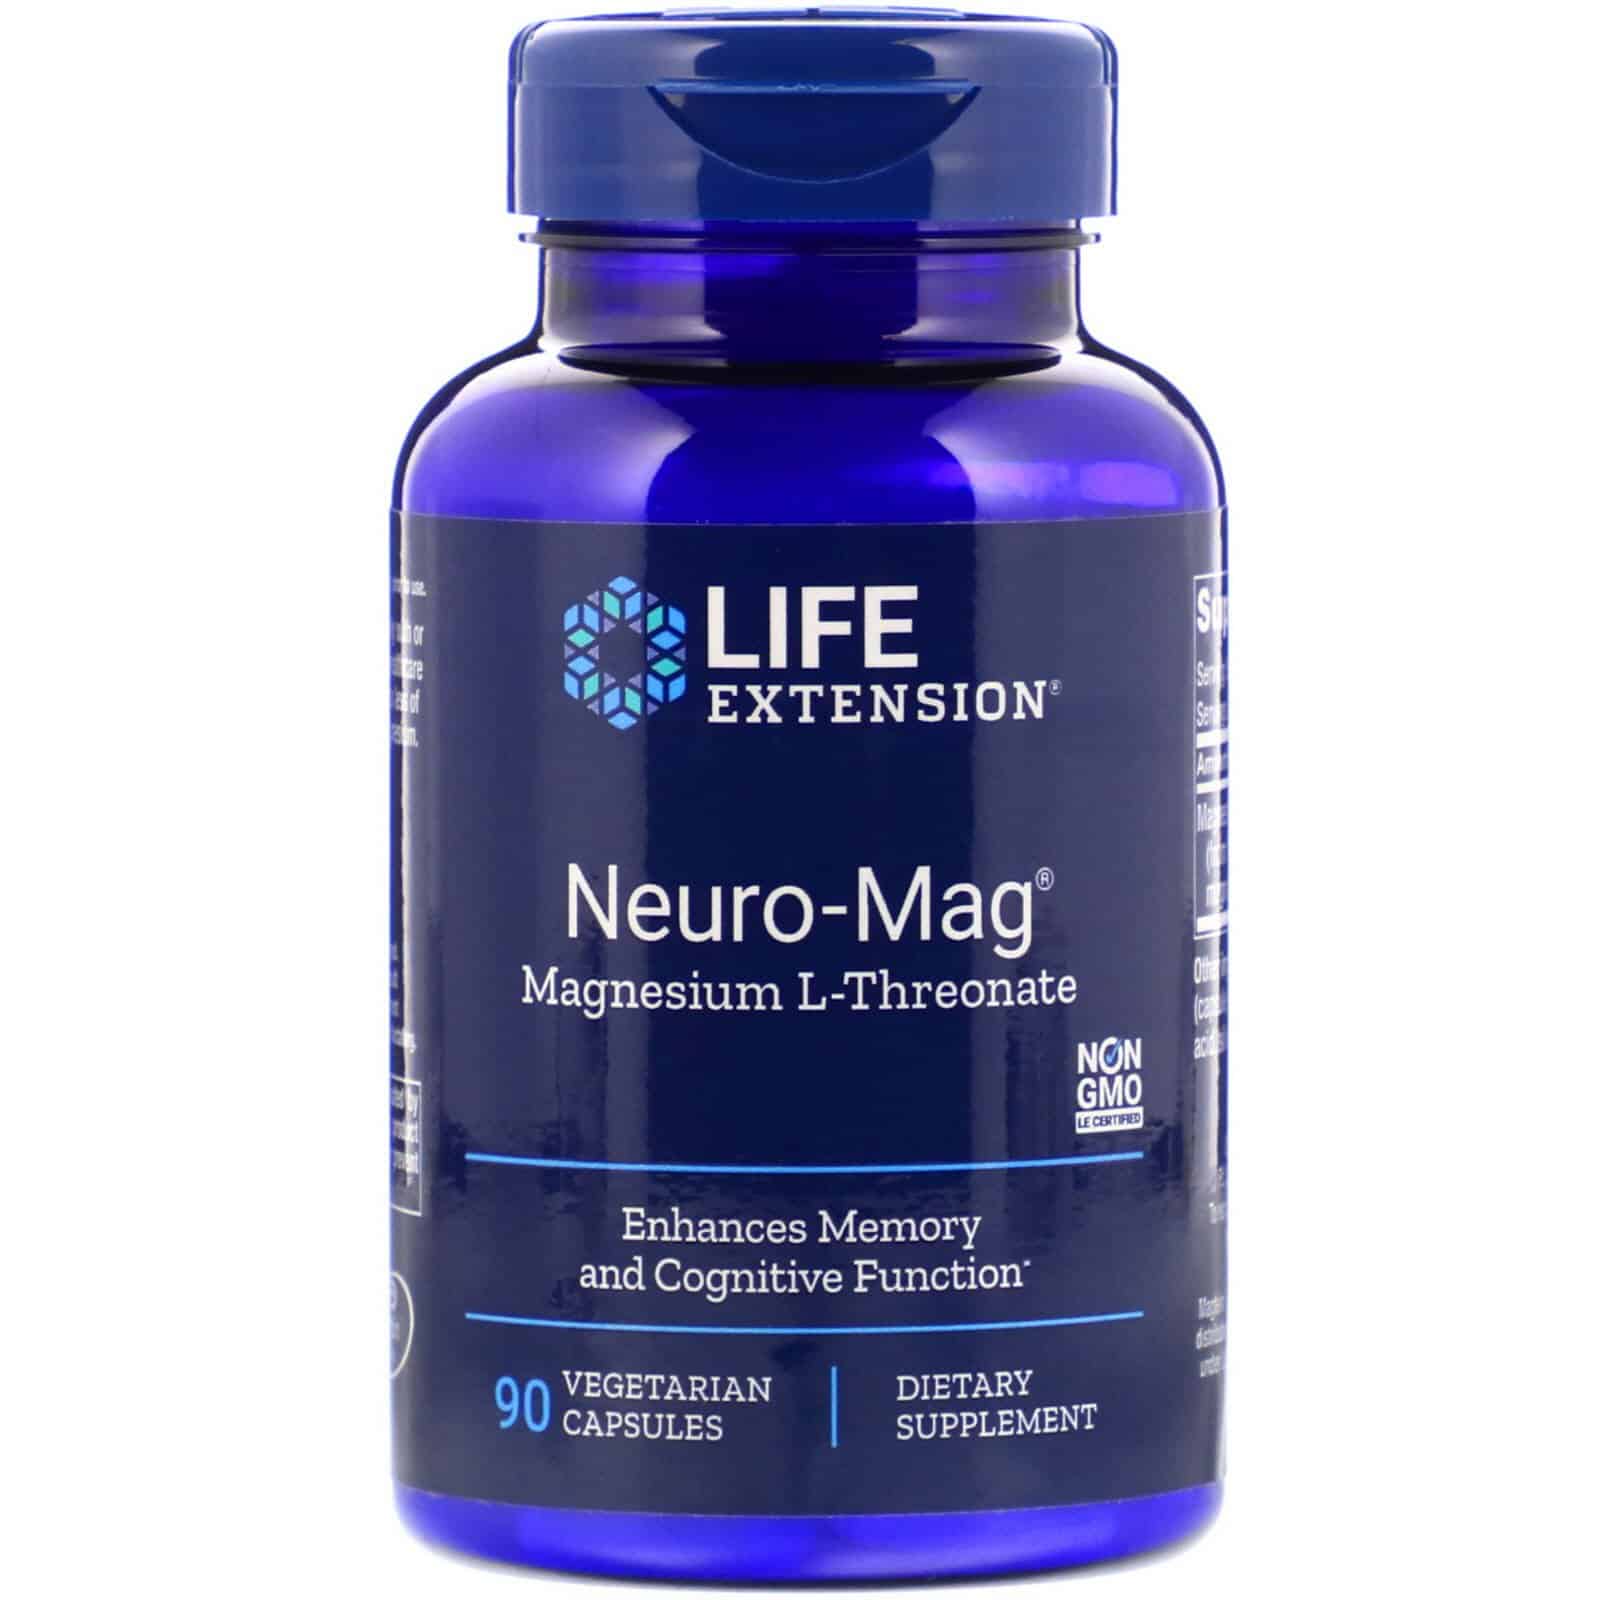 A bottle of Life Extension Neuro-Mag.